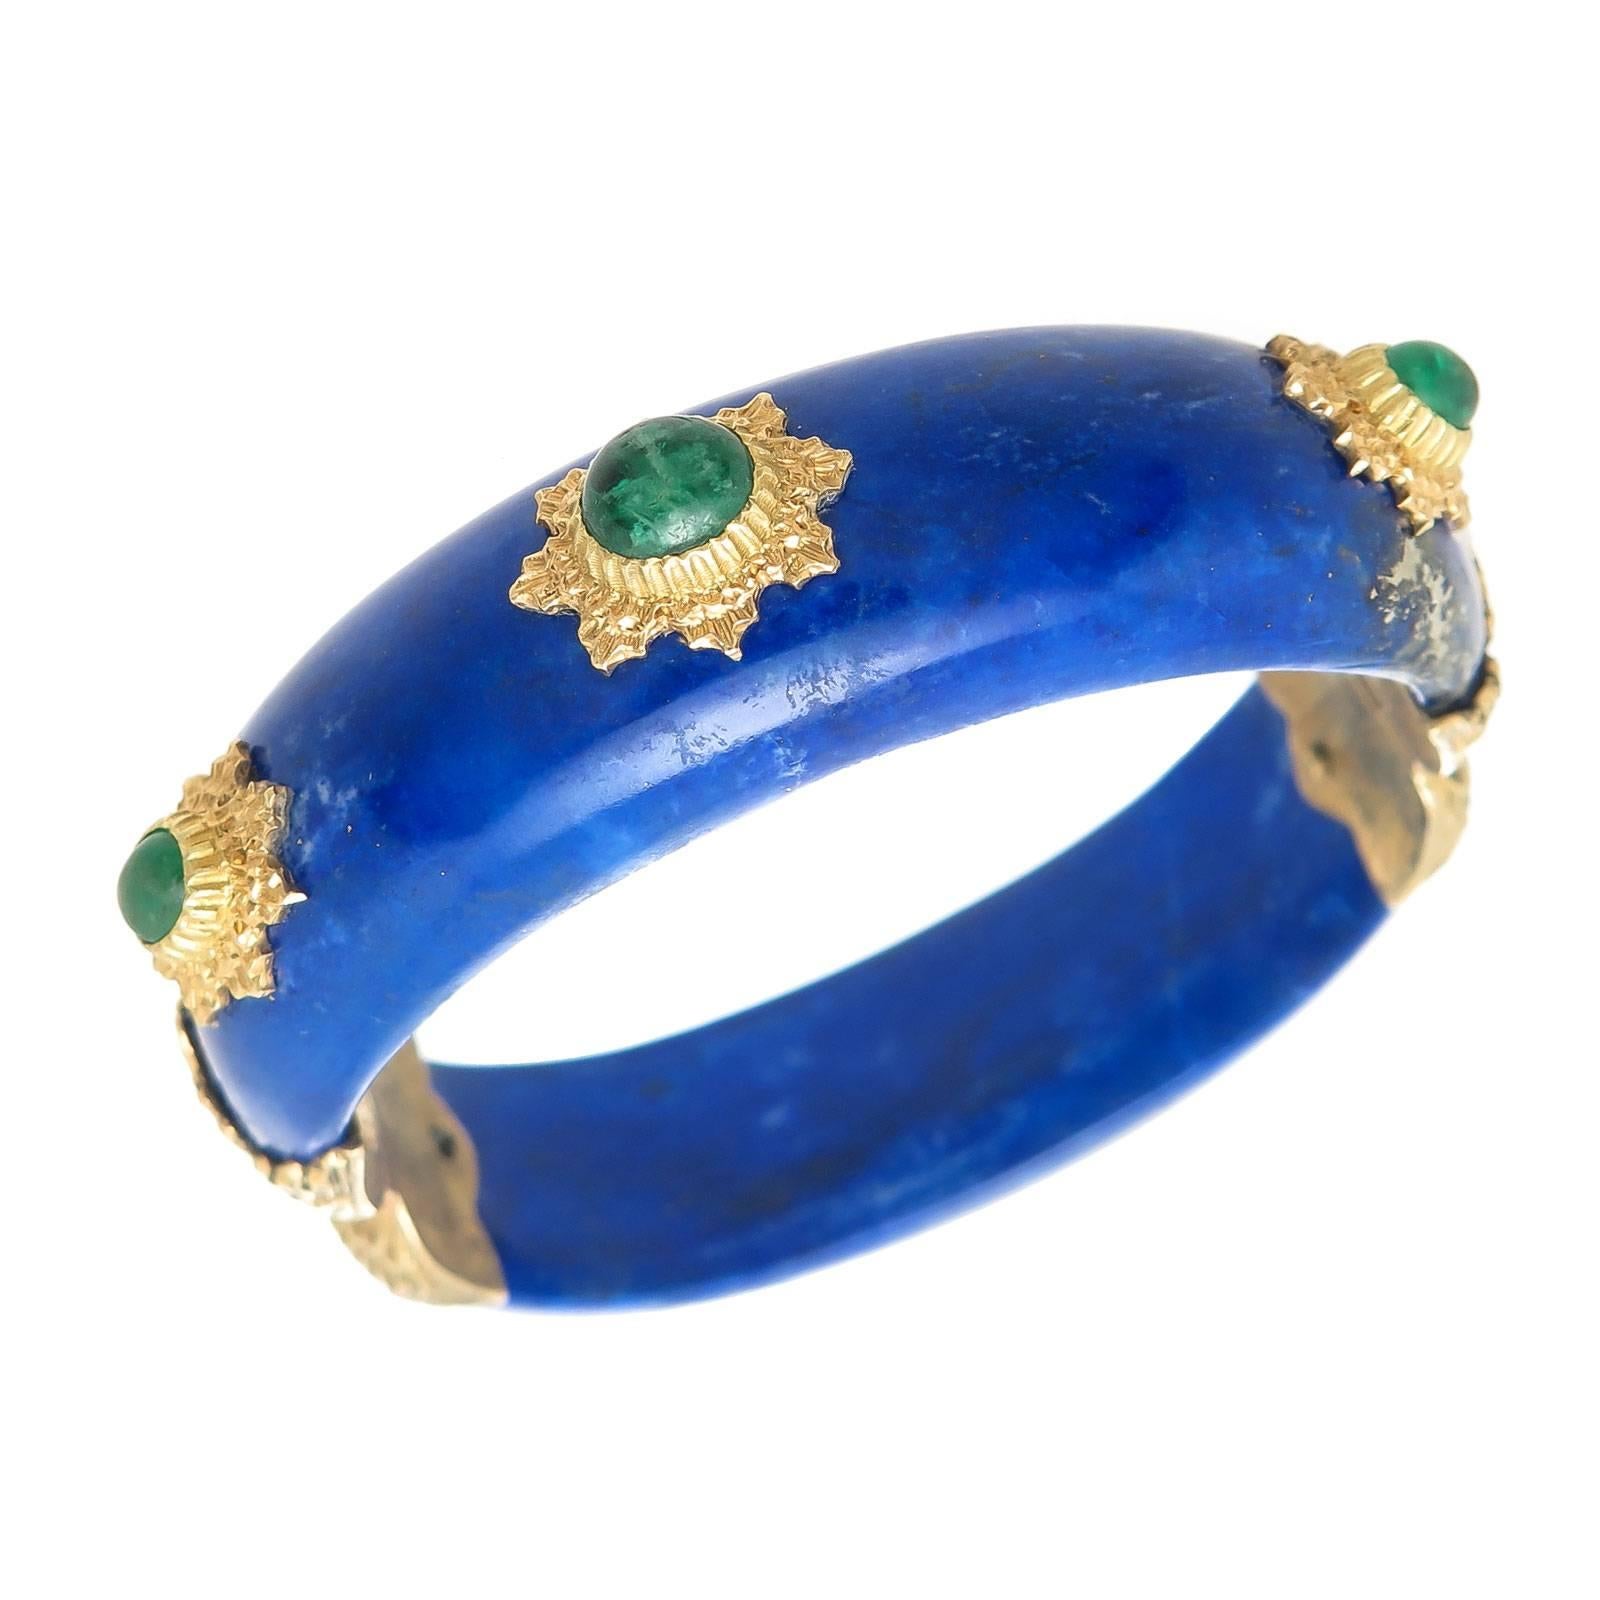 Circa 1970 Buccellati Lapis Lazuli Bangle Bracelet, with 18K yellow Gold Mounted Sections set with Cabochon Emeralds, the largest of which are approximately 1 Carat.  Measuring 5/8 inch wide,  3/8 inch thick and having an inside measurement of 6